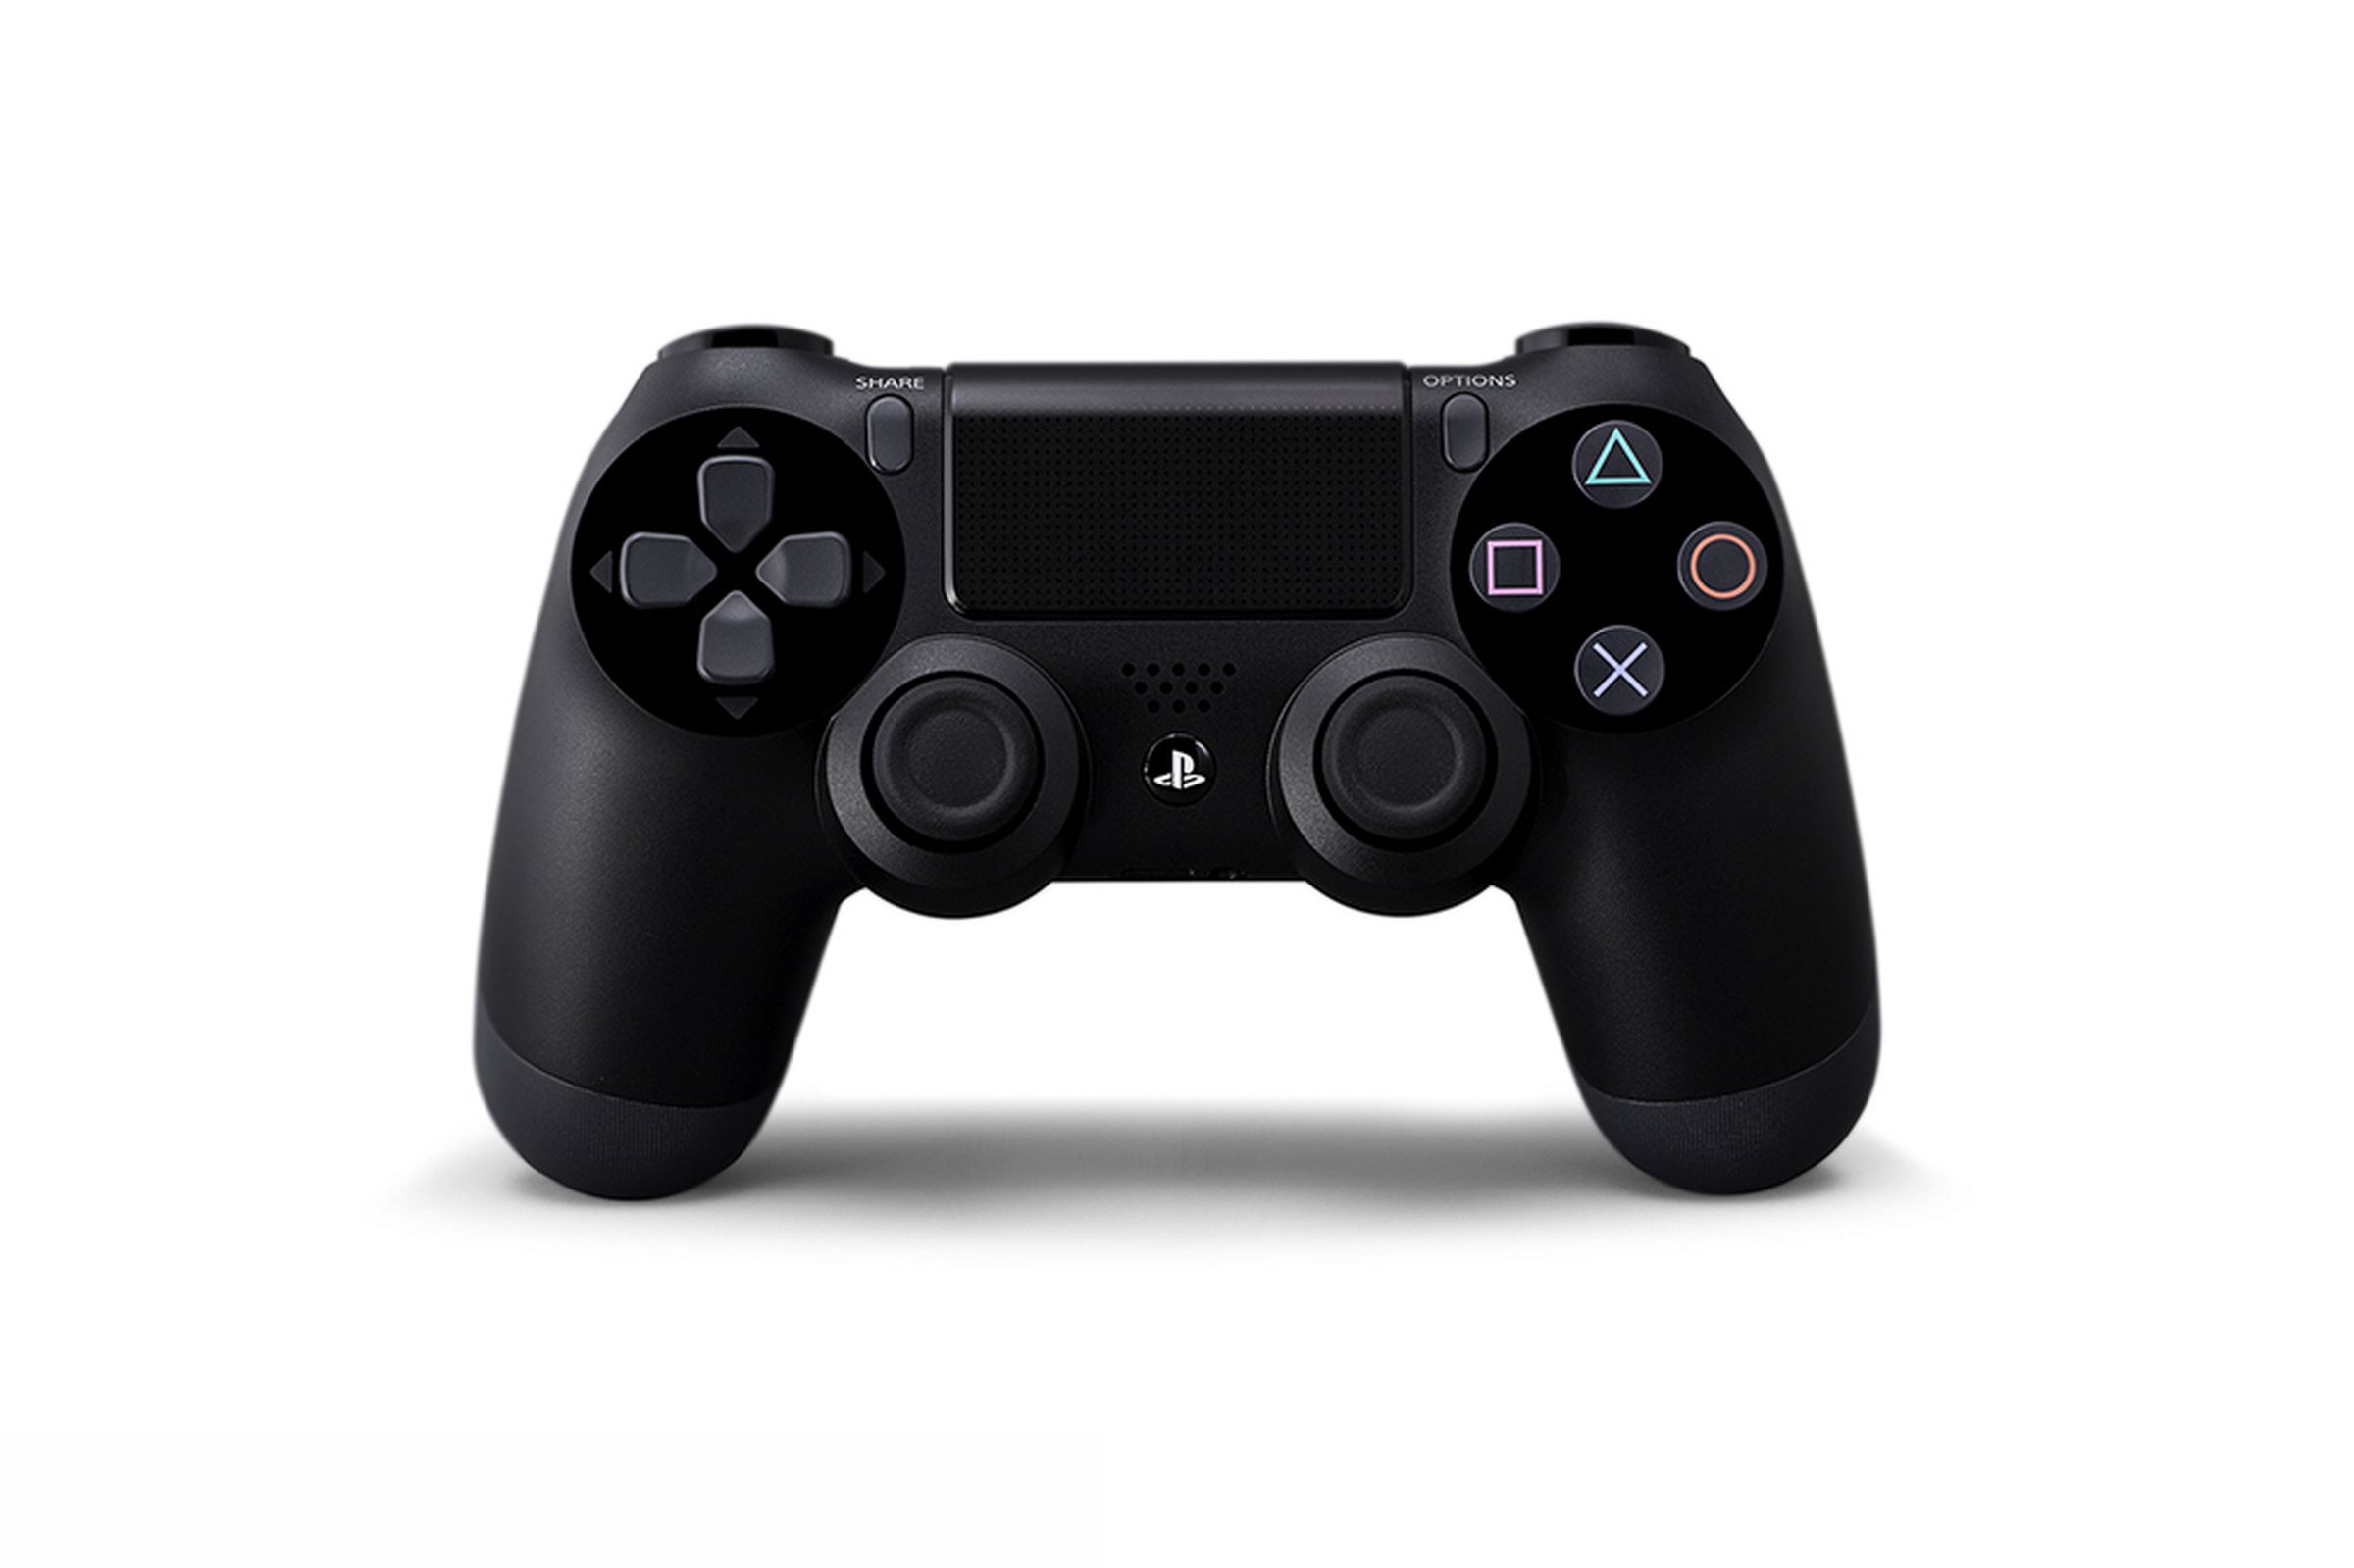 DualShock 4 controller and camera peripheral press images